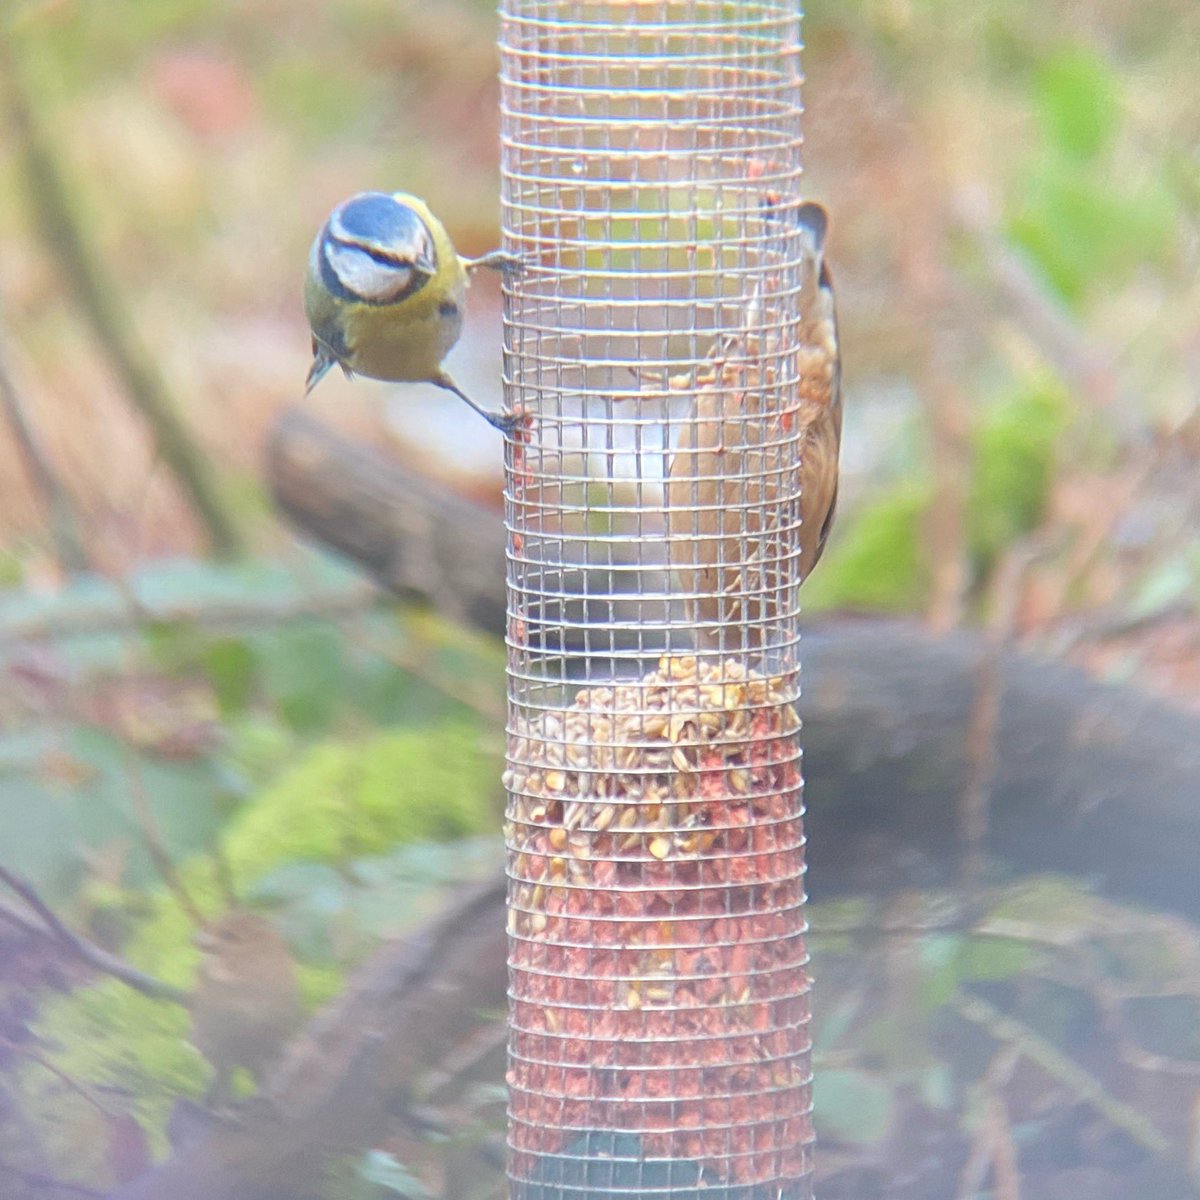 Still no male smew for me, but here is a snap of a blue tit and the underside of a nuthatch on the feeders at @RSPBLochwinnoch today. Also saw siskins, goldeneye, goldcrests and treecreepers, among other things! #birds #getbirding